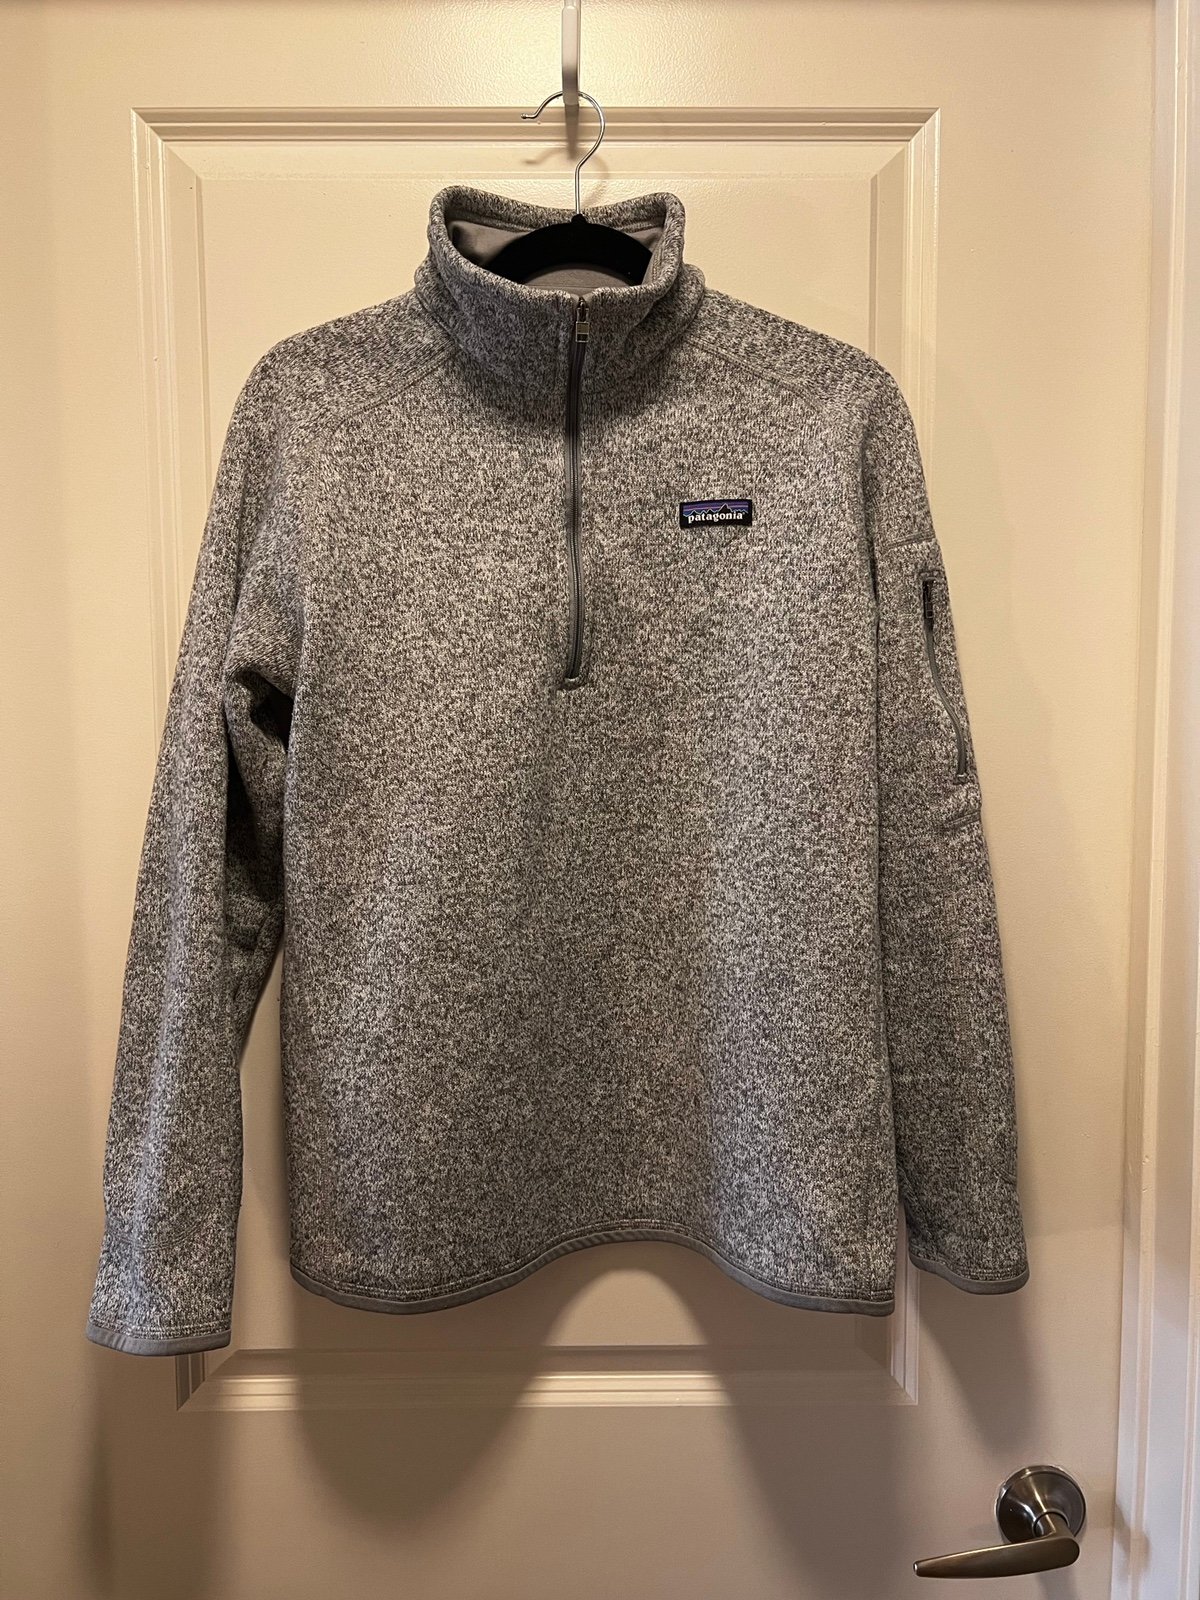 Nice Patagonia Better Sweater 1/4-Zip Jacket Ibxd6DxdE just buy it